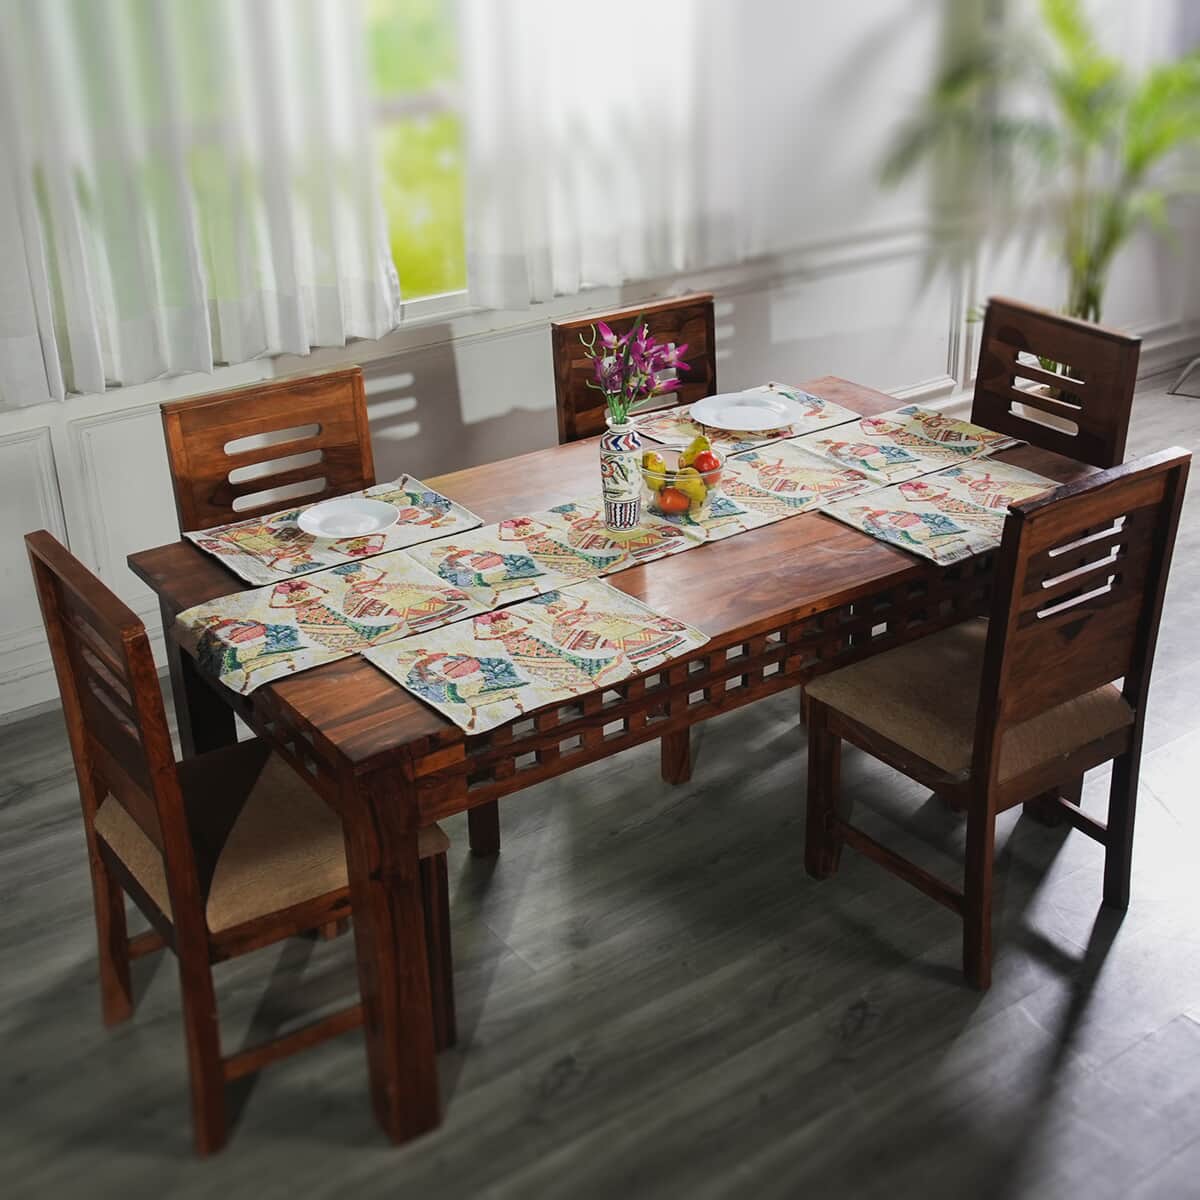 Set of 5 Multi Color Jacquard Printed Placemats (13"x19") and Table Runner (13"x72") image number 0